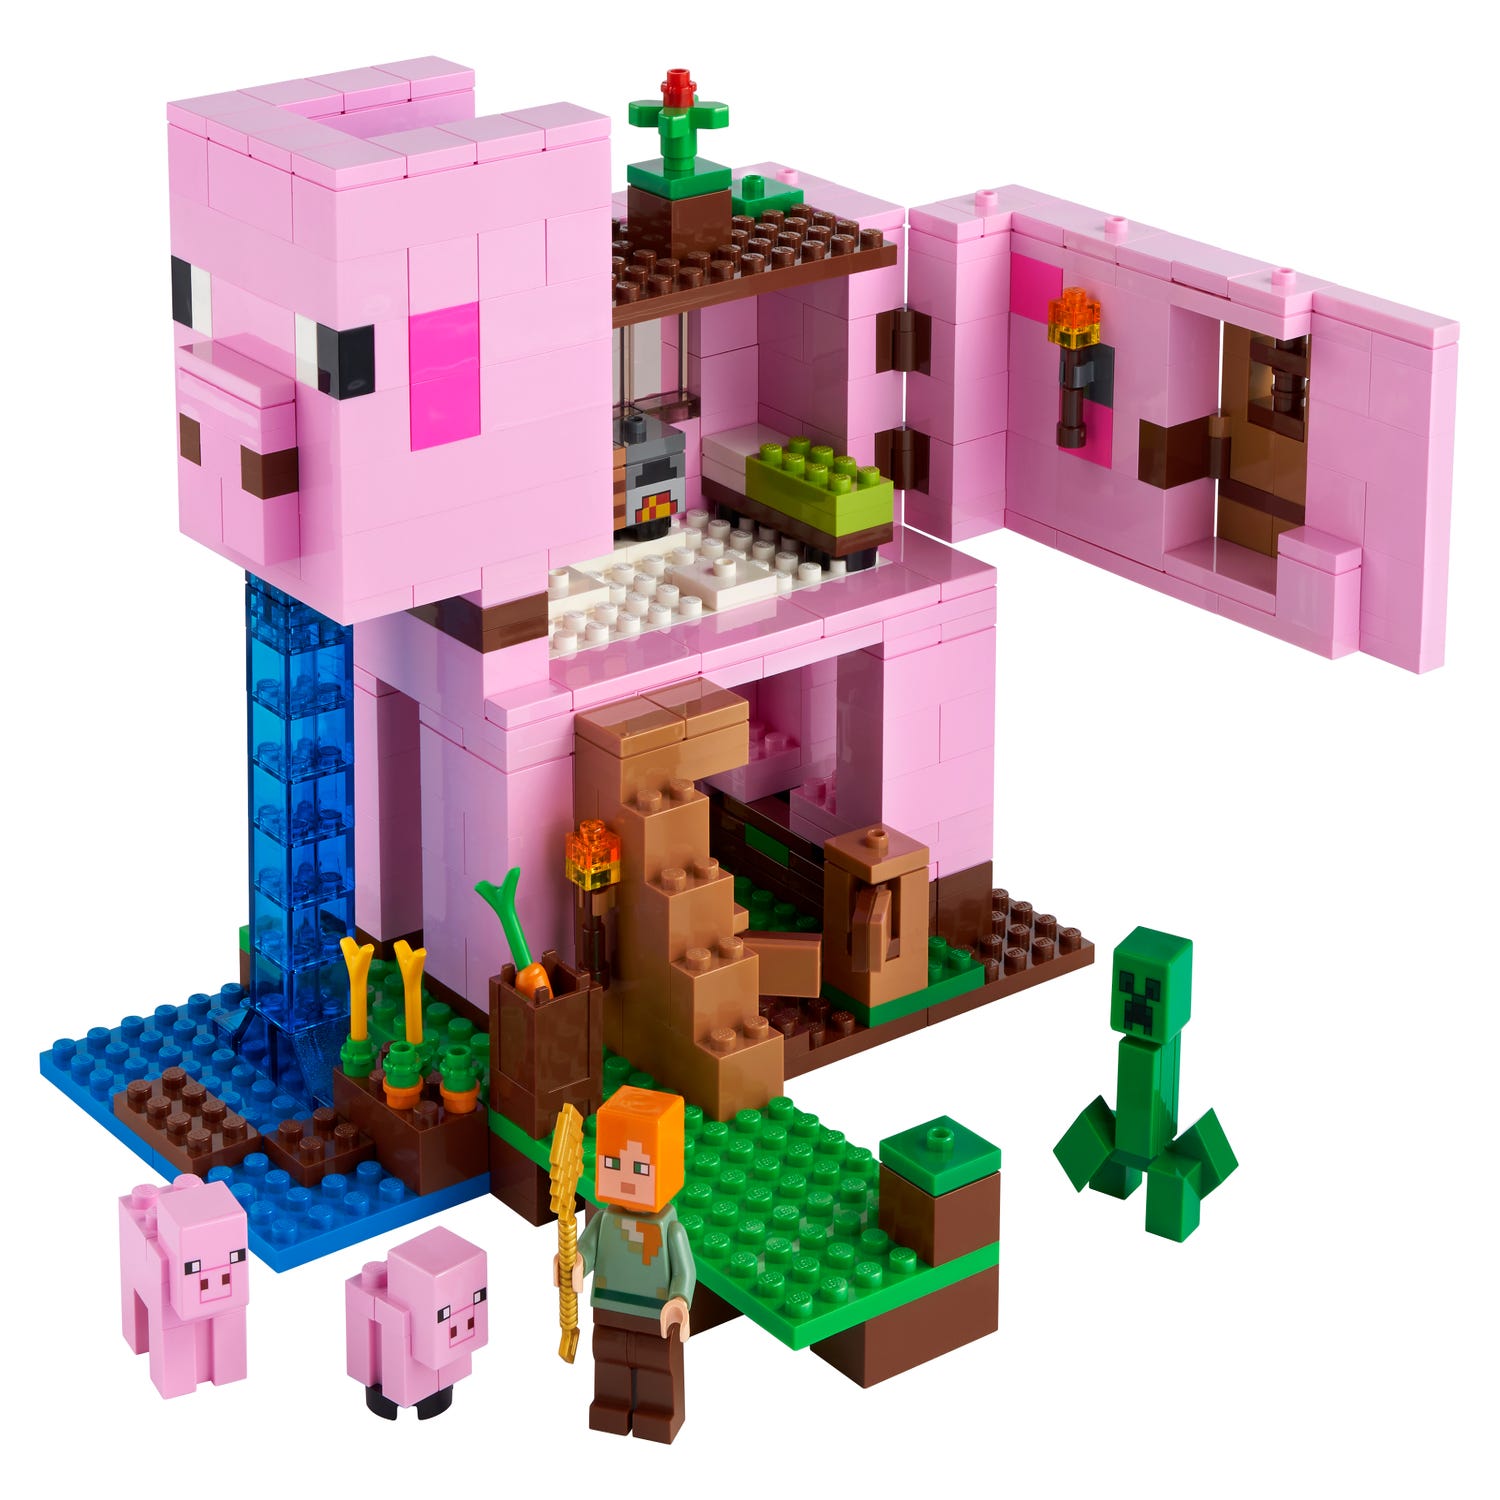 The Pig House Minecraft Buy Online At The Official Lego Shop De